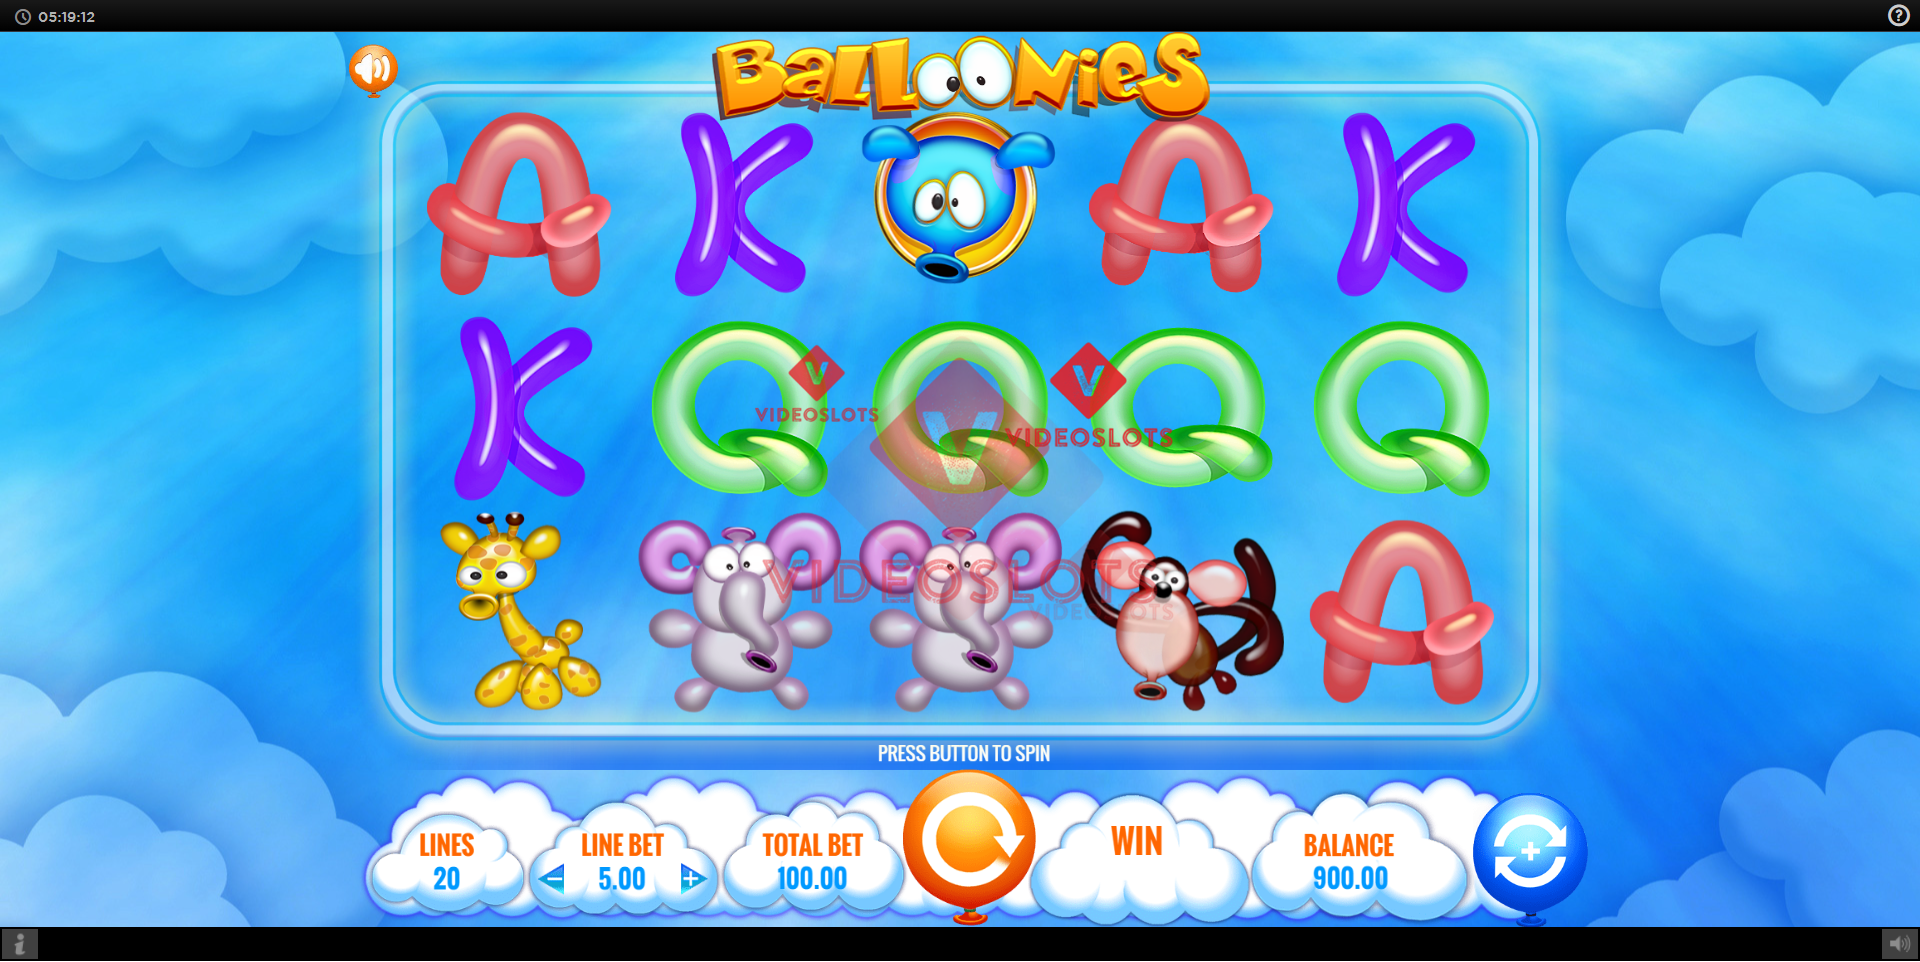 Base Game for Balloonies slot from IGT